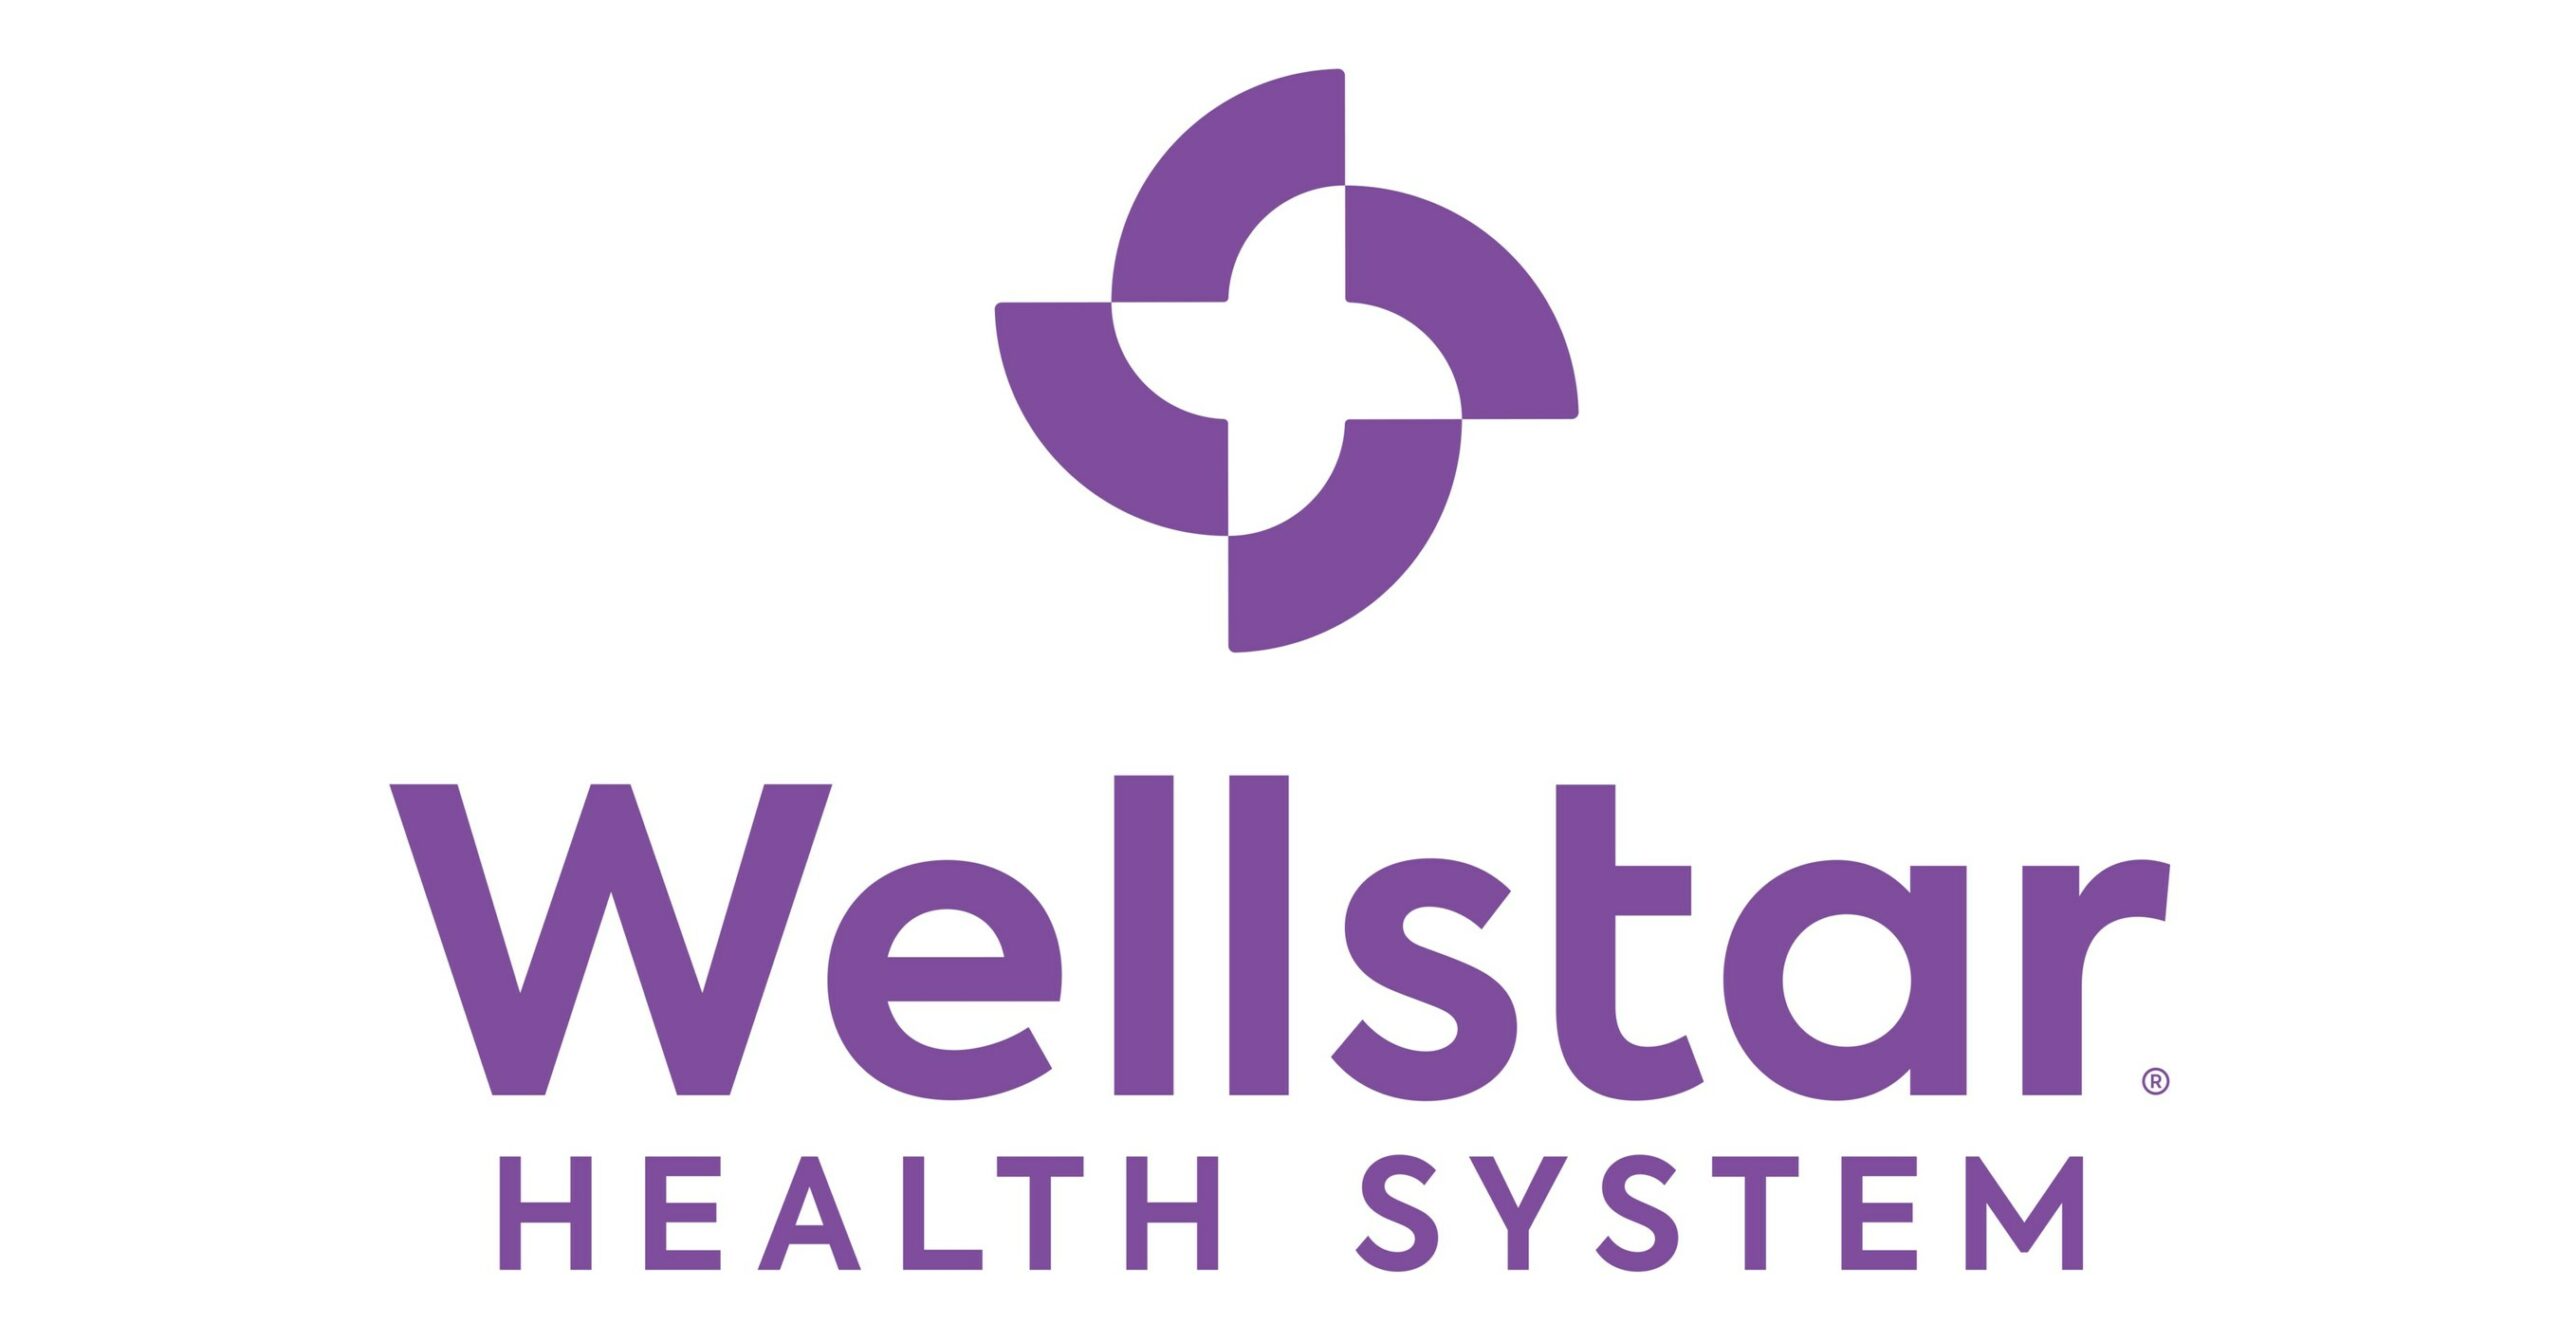 Wellstar Health System partners with CLEAR to empower patients to take control of their health information and improve the consumer experience